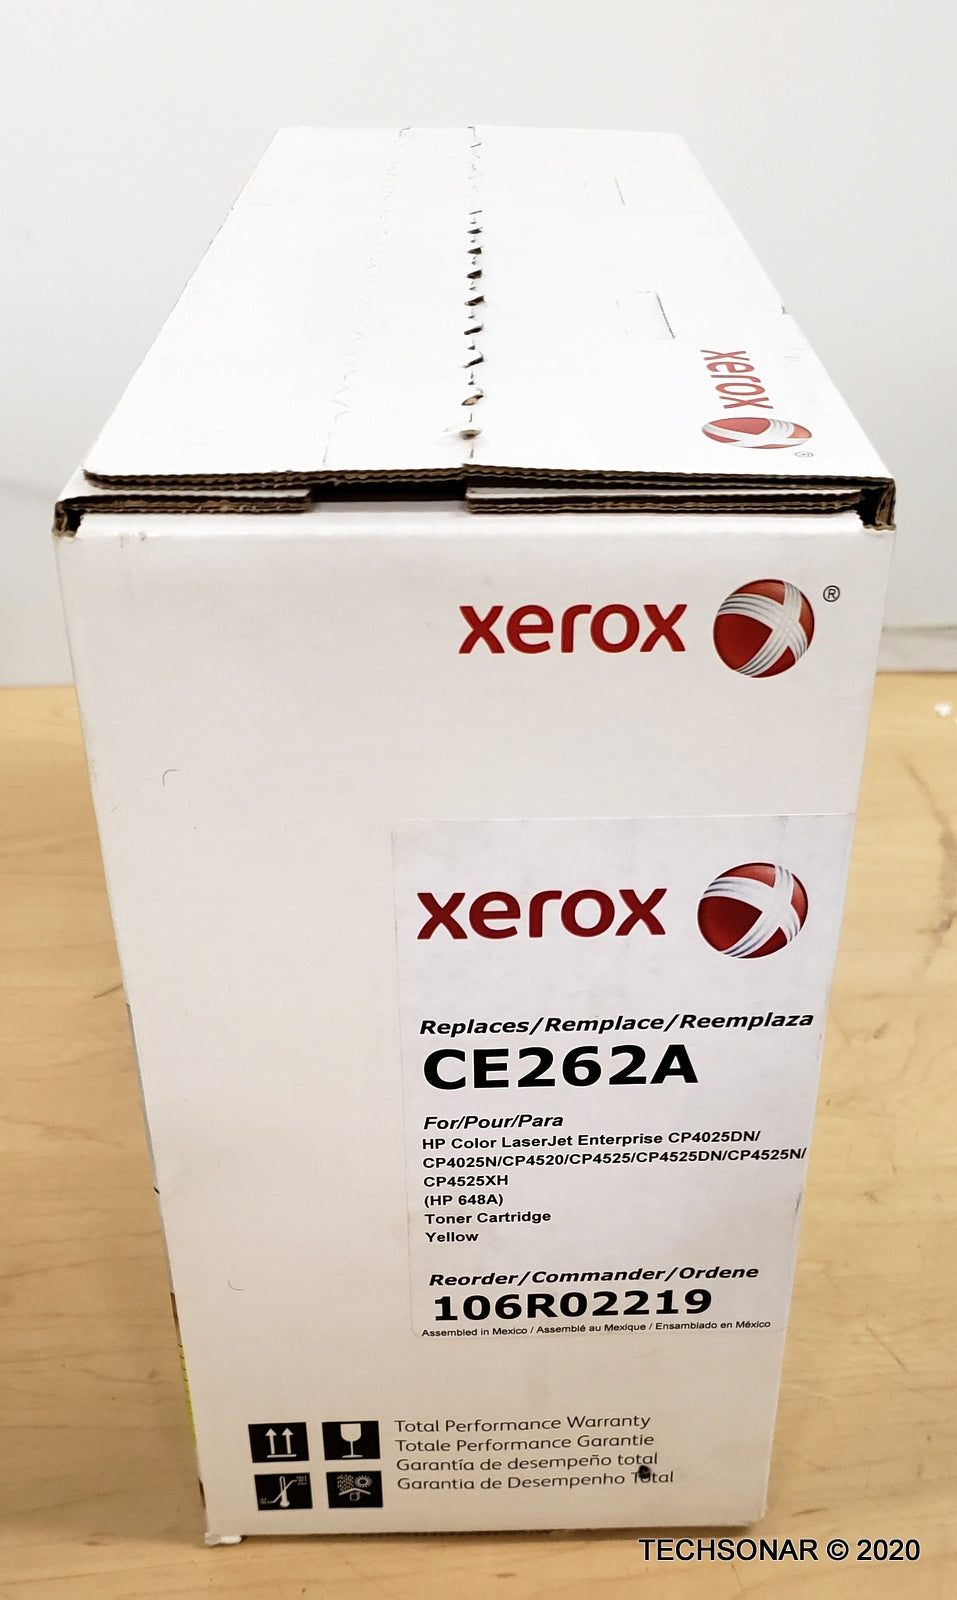 Xerox CE262A or 106R02219 Replacement Yellow Toner Cartridge